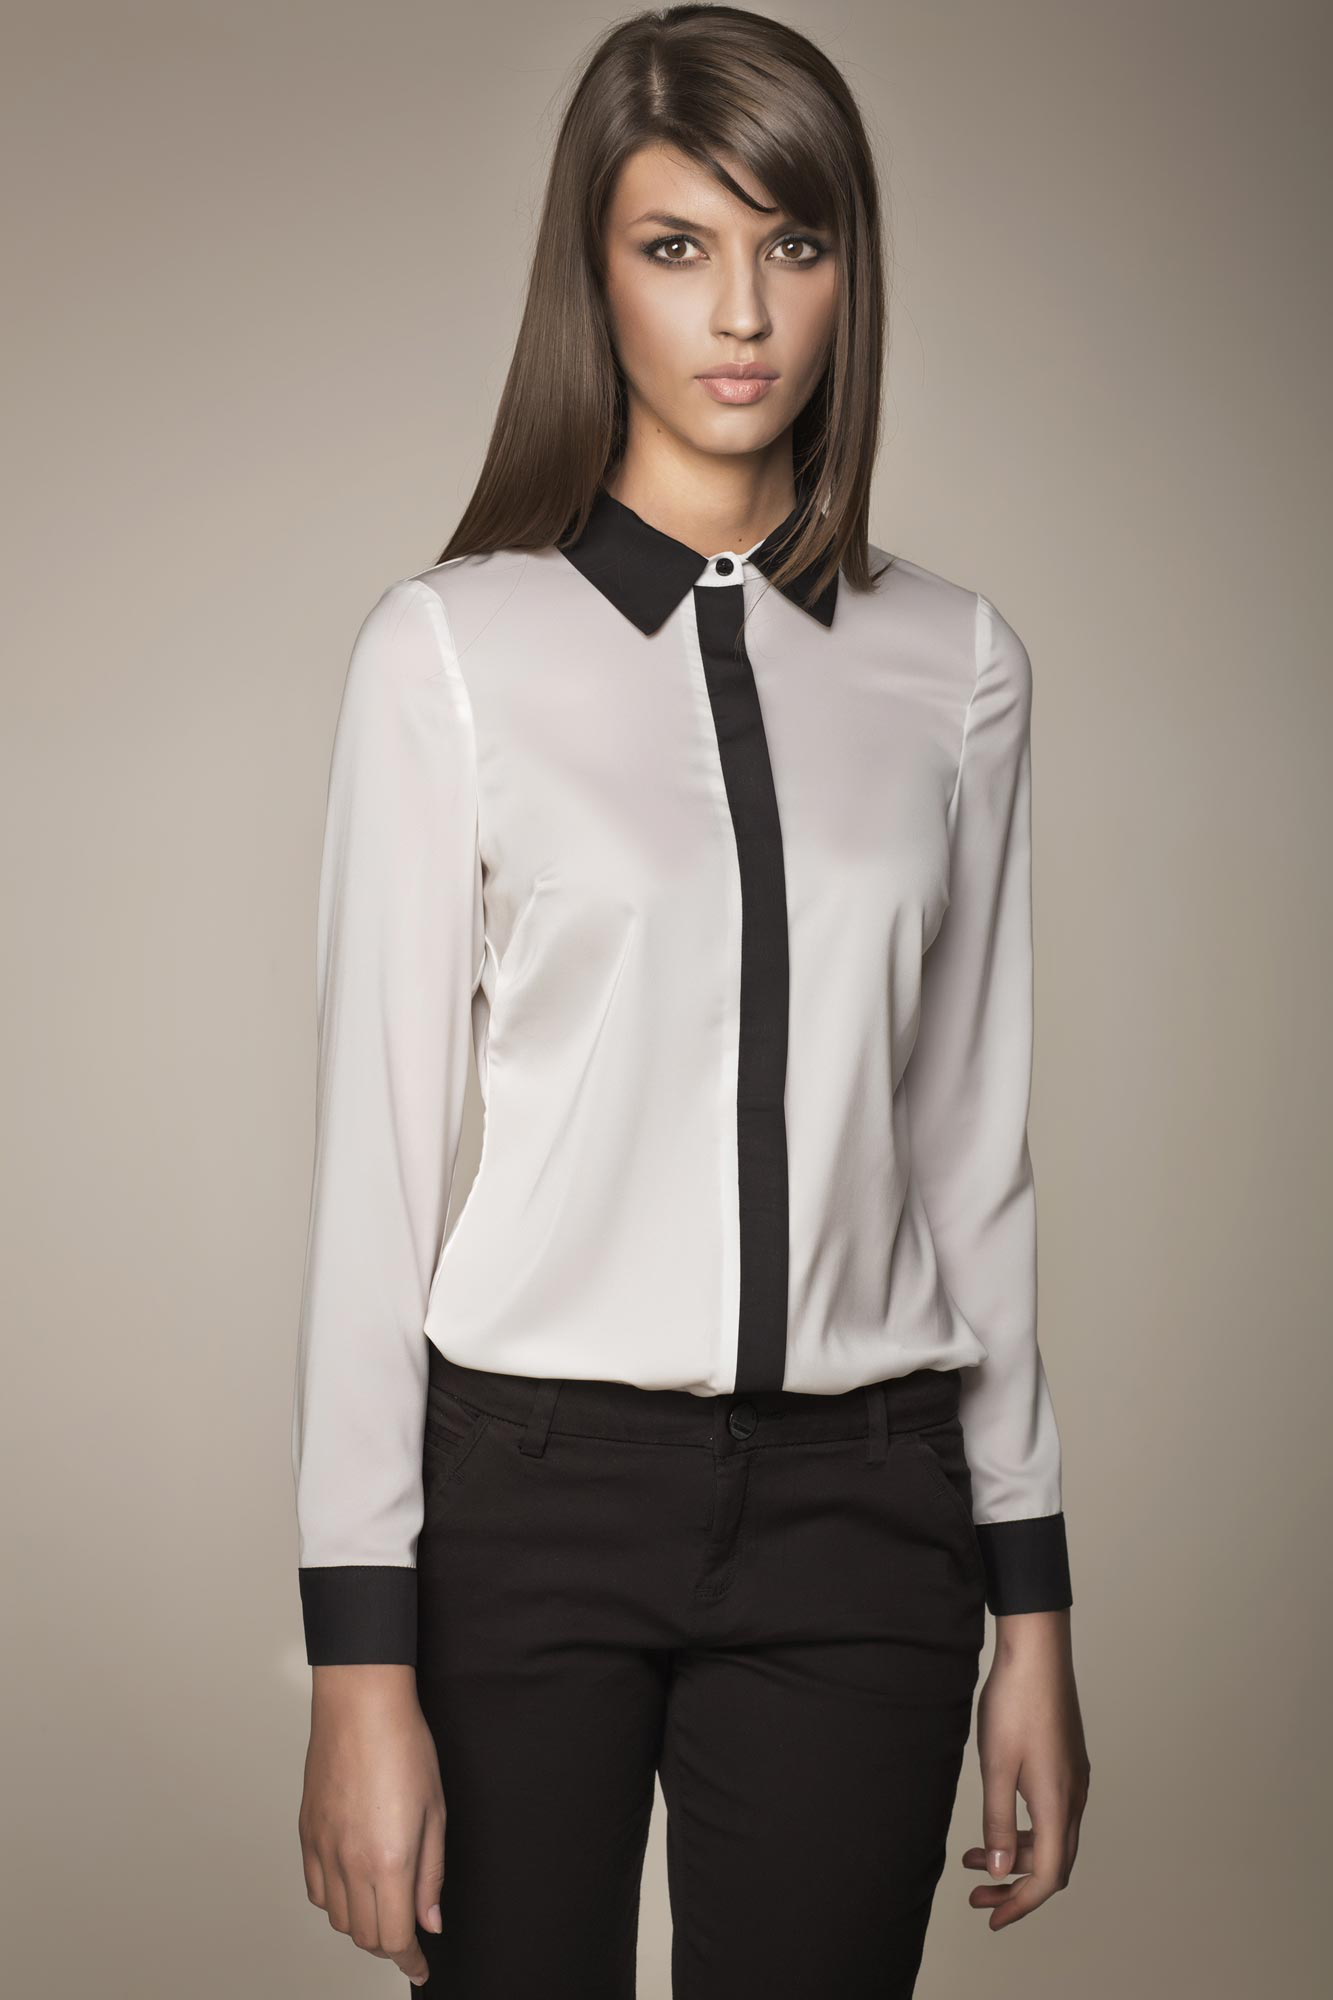 This very chic shirt plays with fashion codes and promises us a unique and undeniably elegant style.